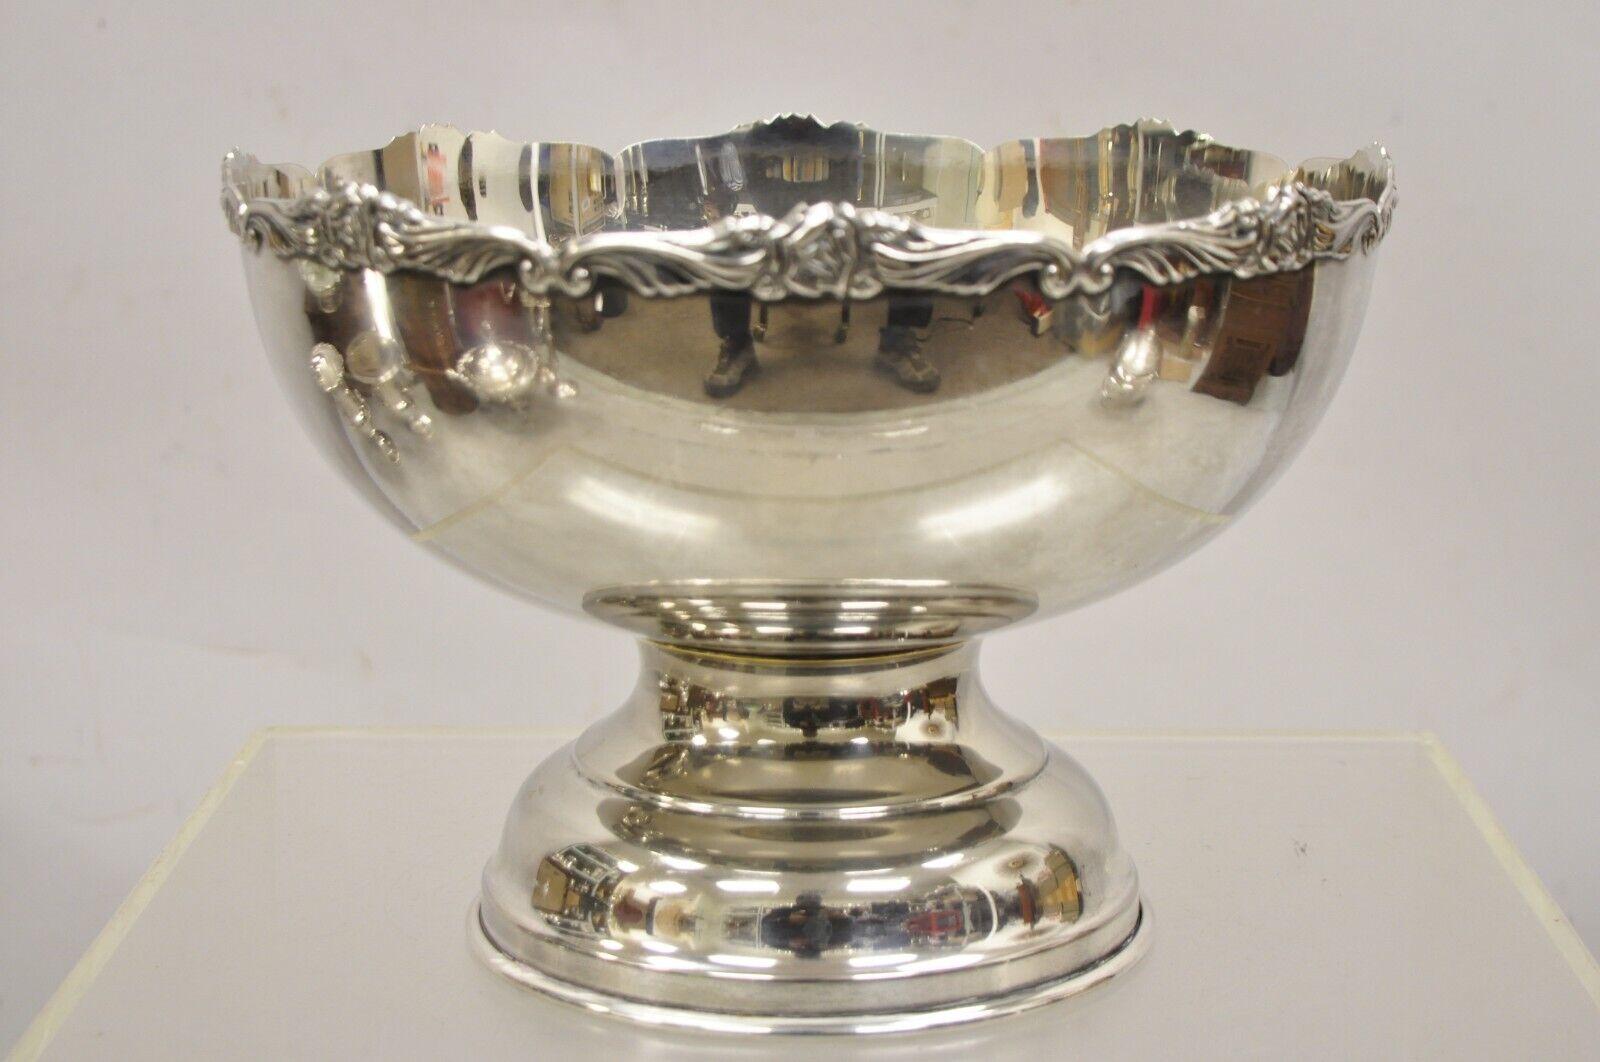 Vintage EP Japan Silver Plated Floral Rose Punch Bowl. Circa Mid to Late 20th Century. Measurements:  8